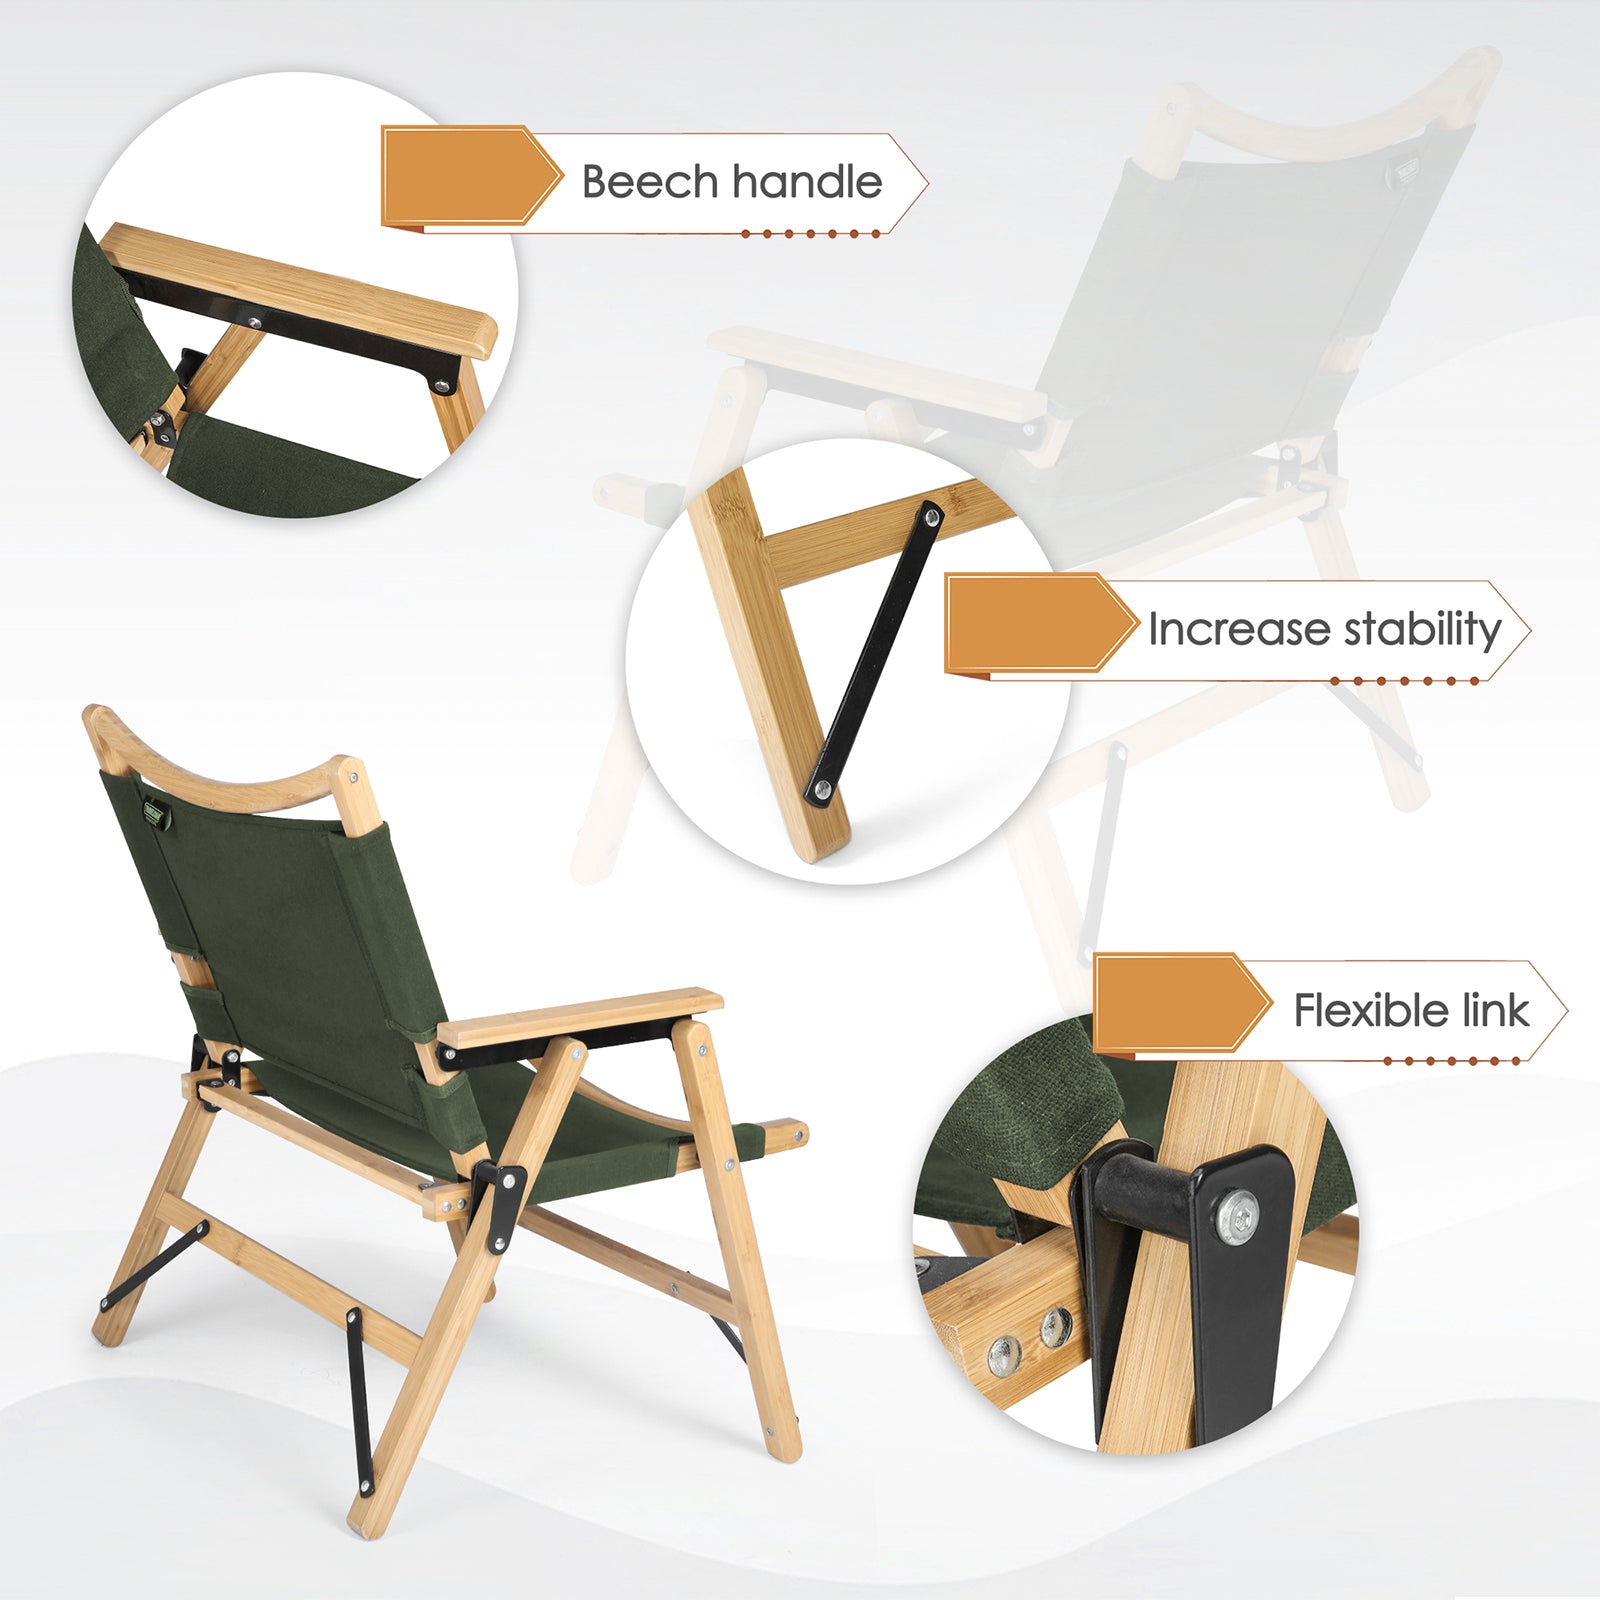 (Out of Stock) 2 Pack Foldable Portable Wooden Camping Chair for Adults Outdoor Leisure Chair with Storage Bag